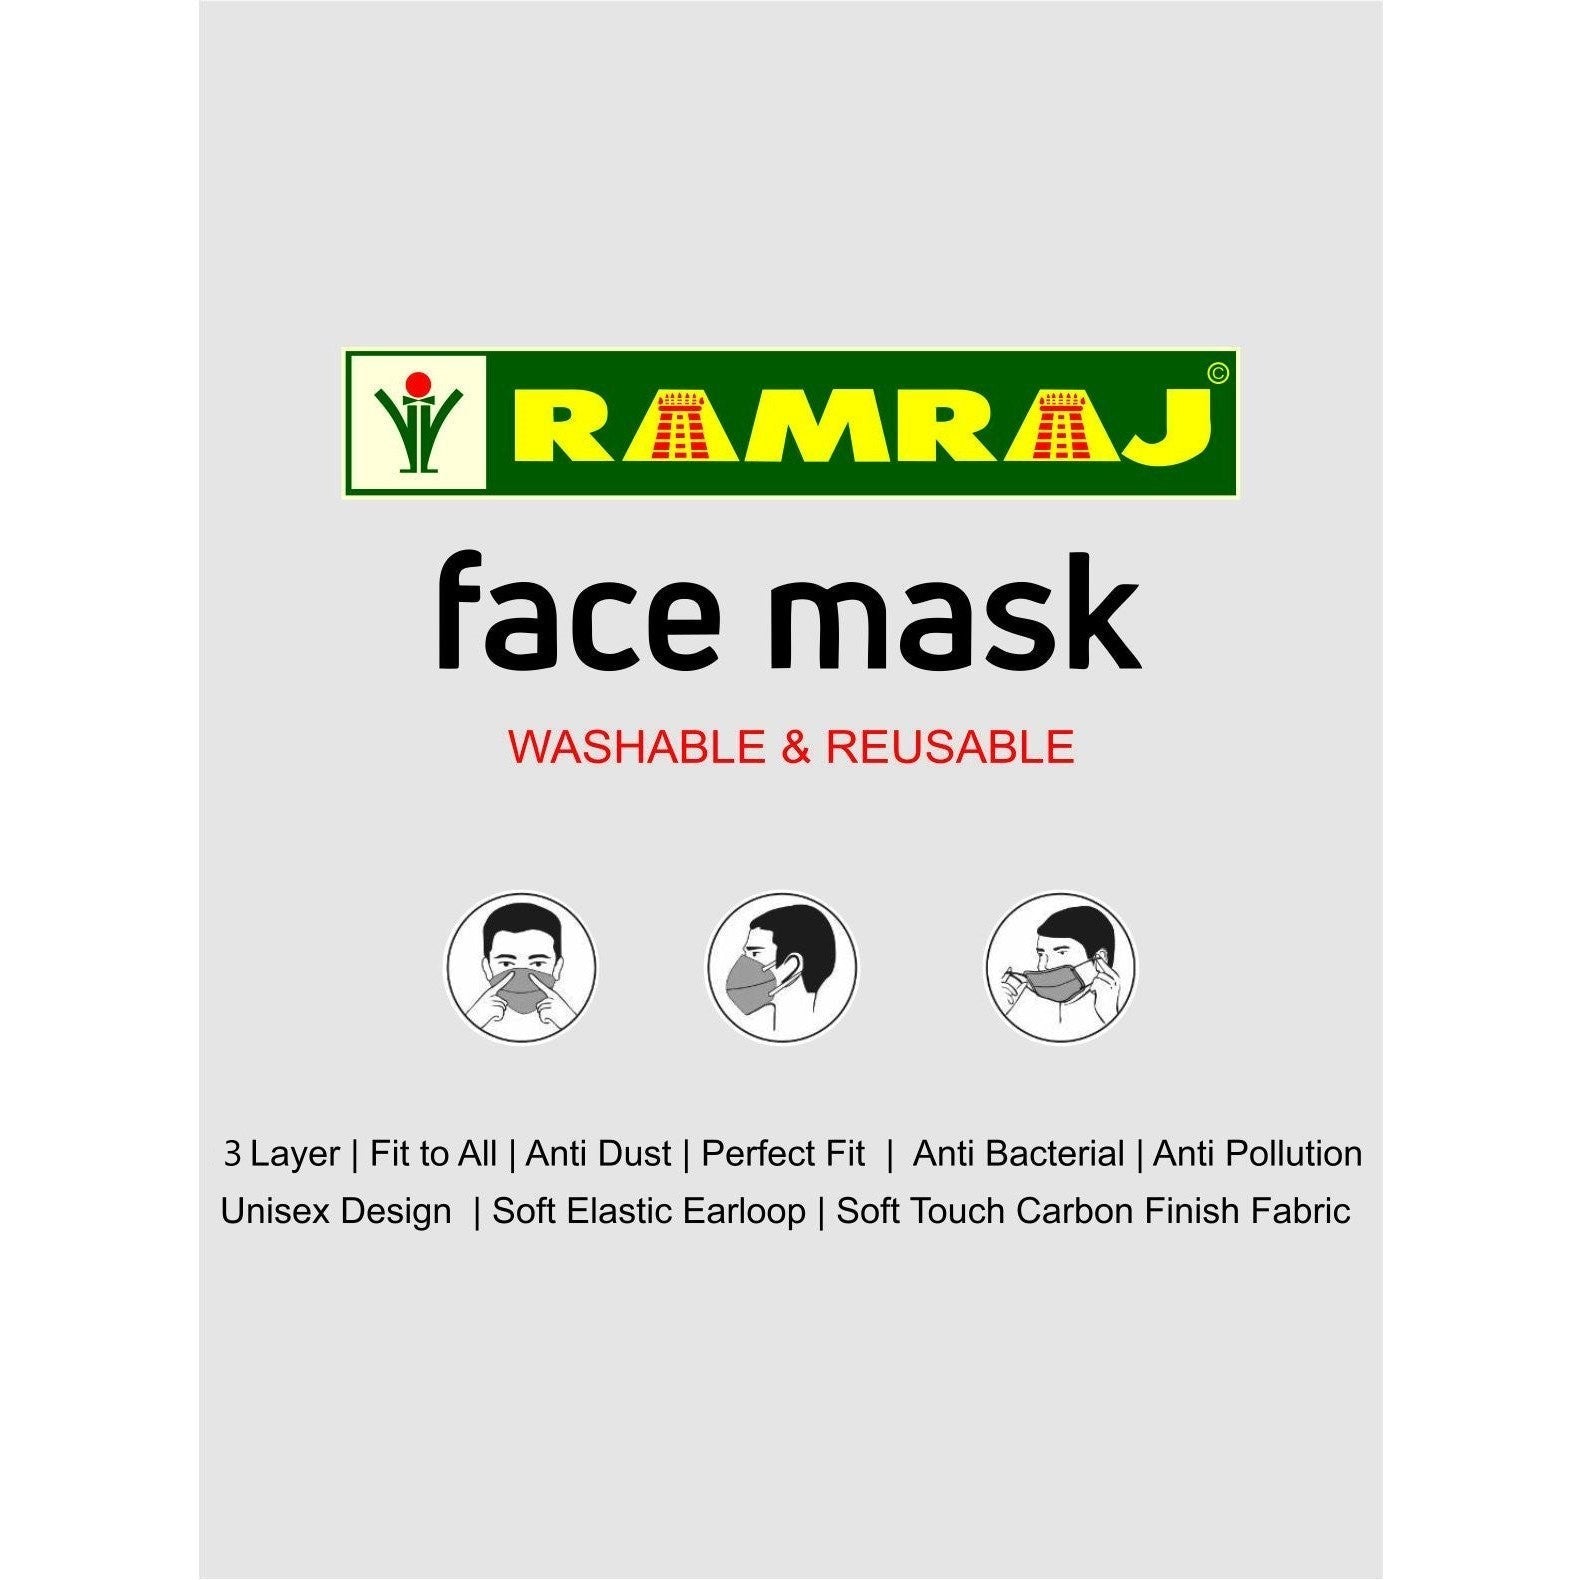 Woven White Face Mask - 3 Layer [ 6 Pcs Pack ]